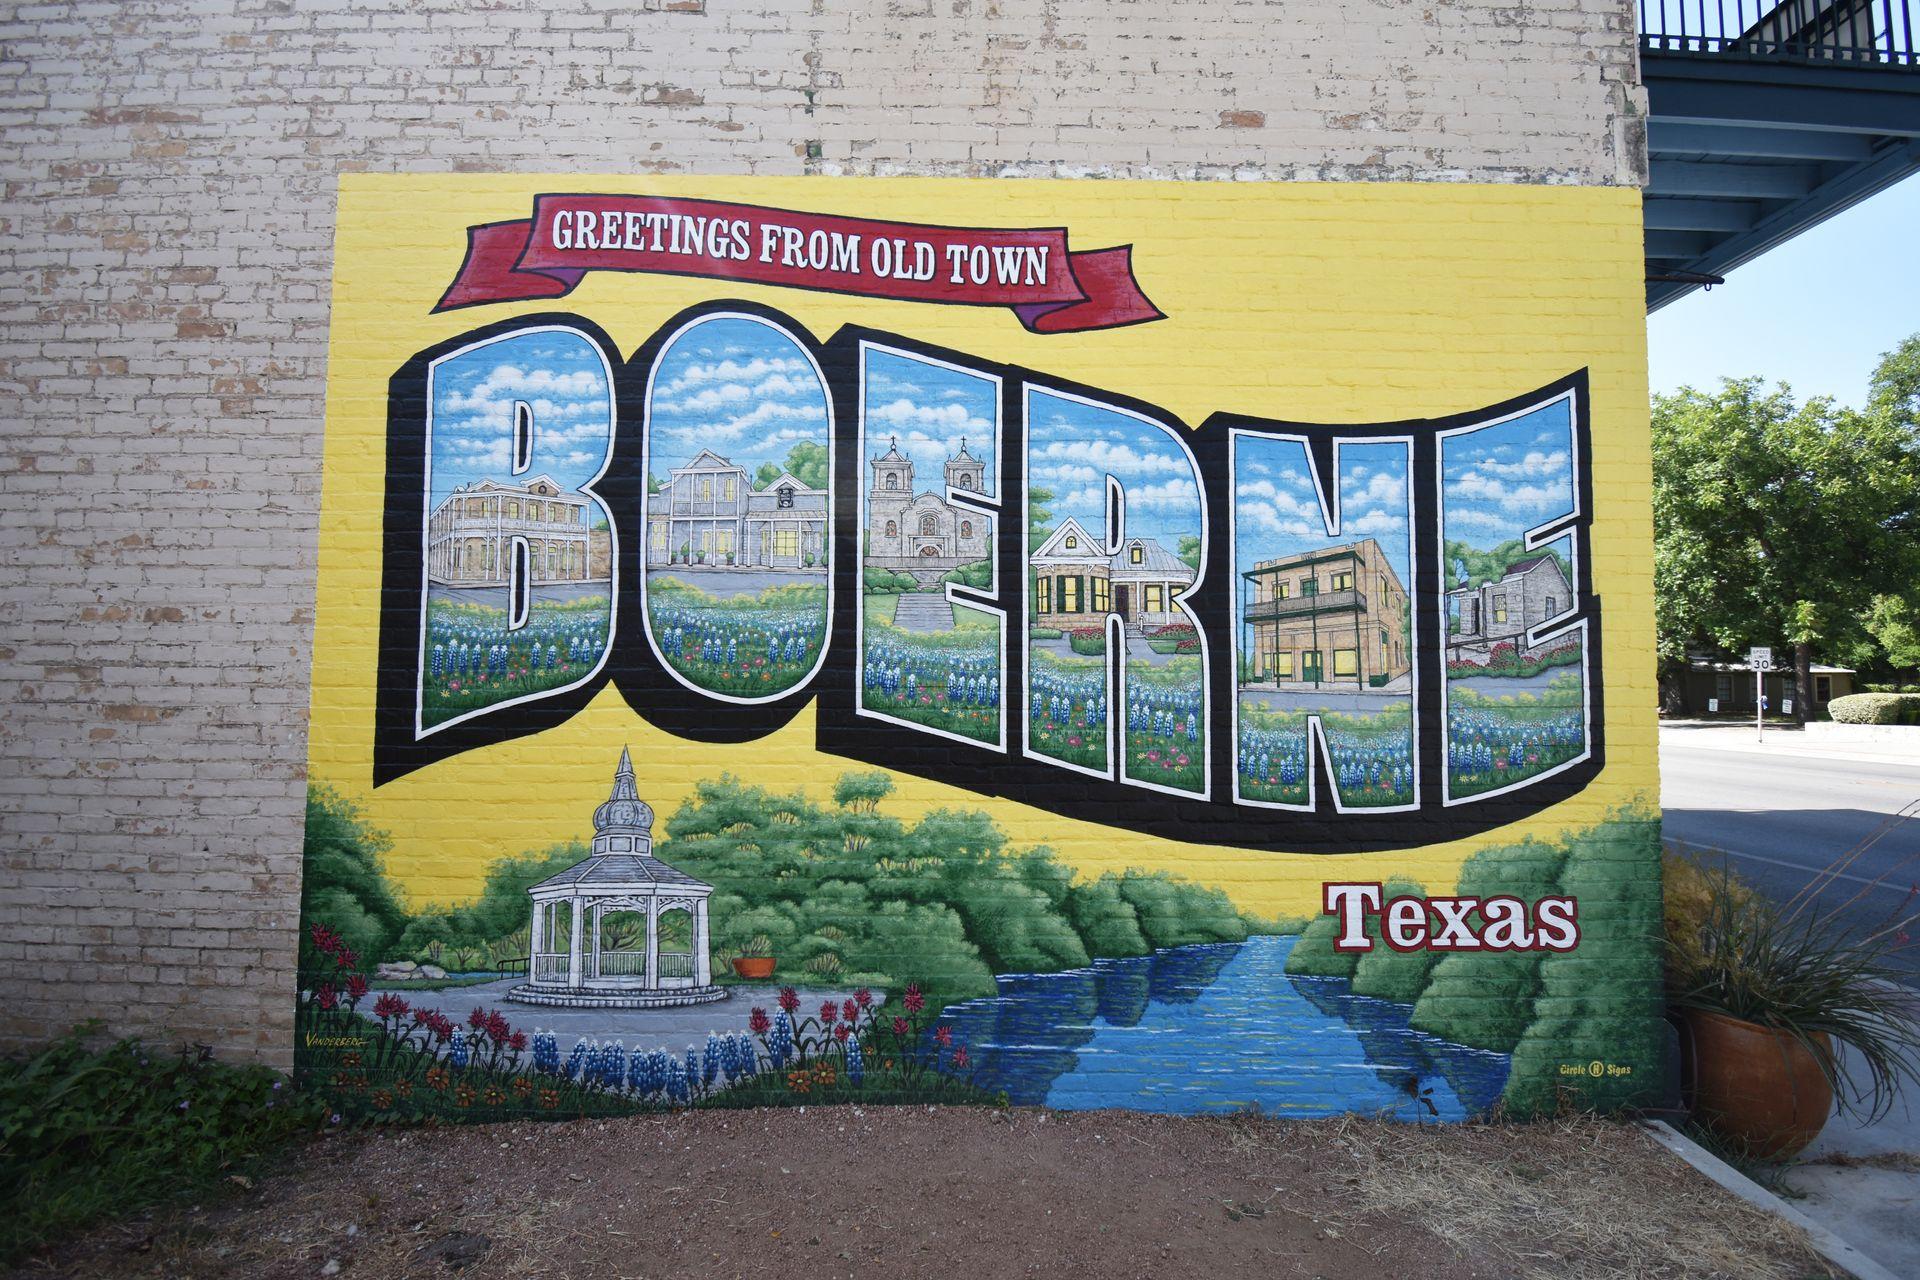 A mural of the word Boerne with a scene of buildings and flowers painted inside of the letters.